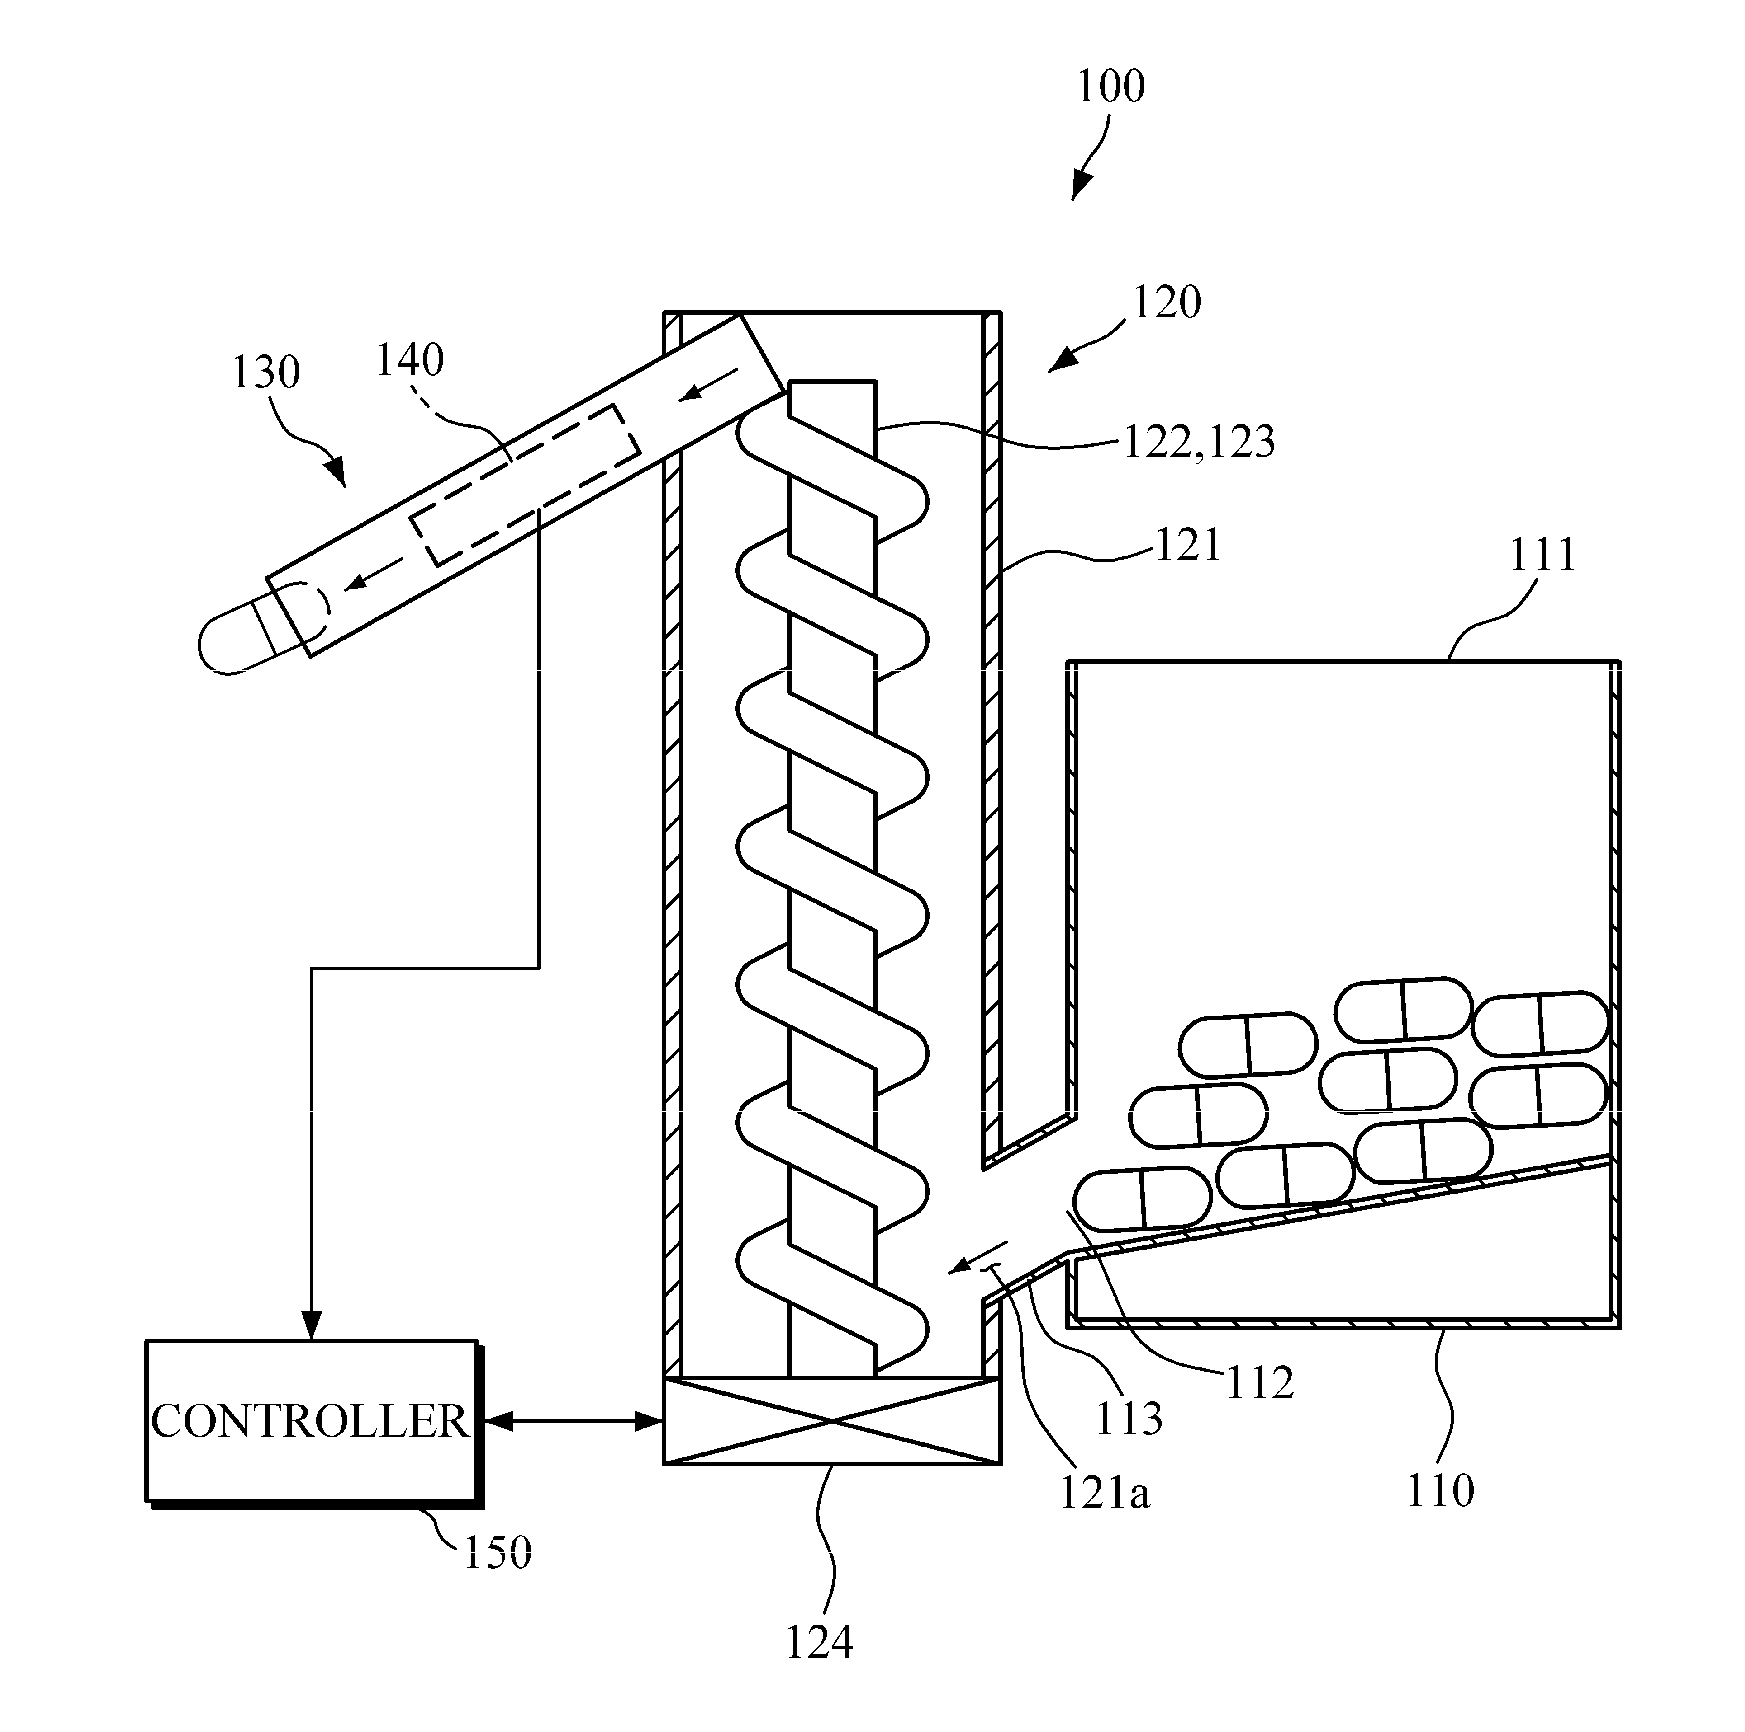 Atypical pill dispensing apparatus